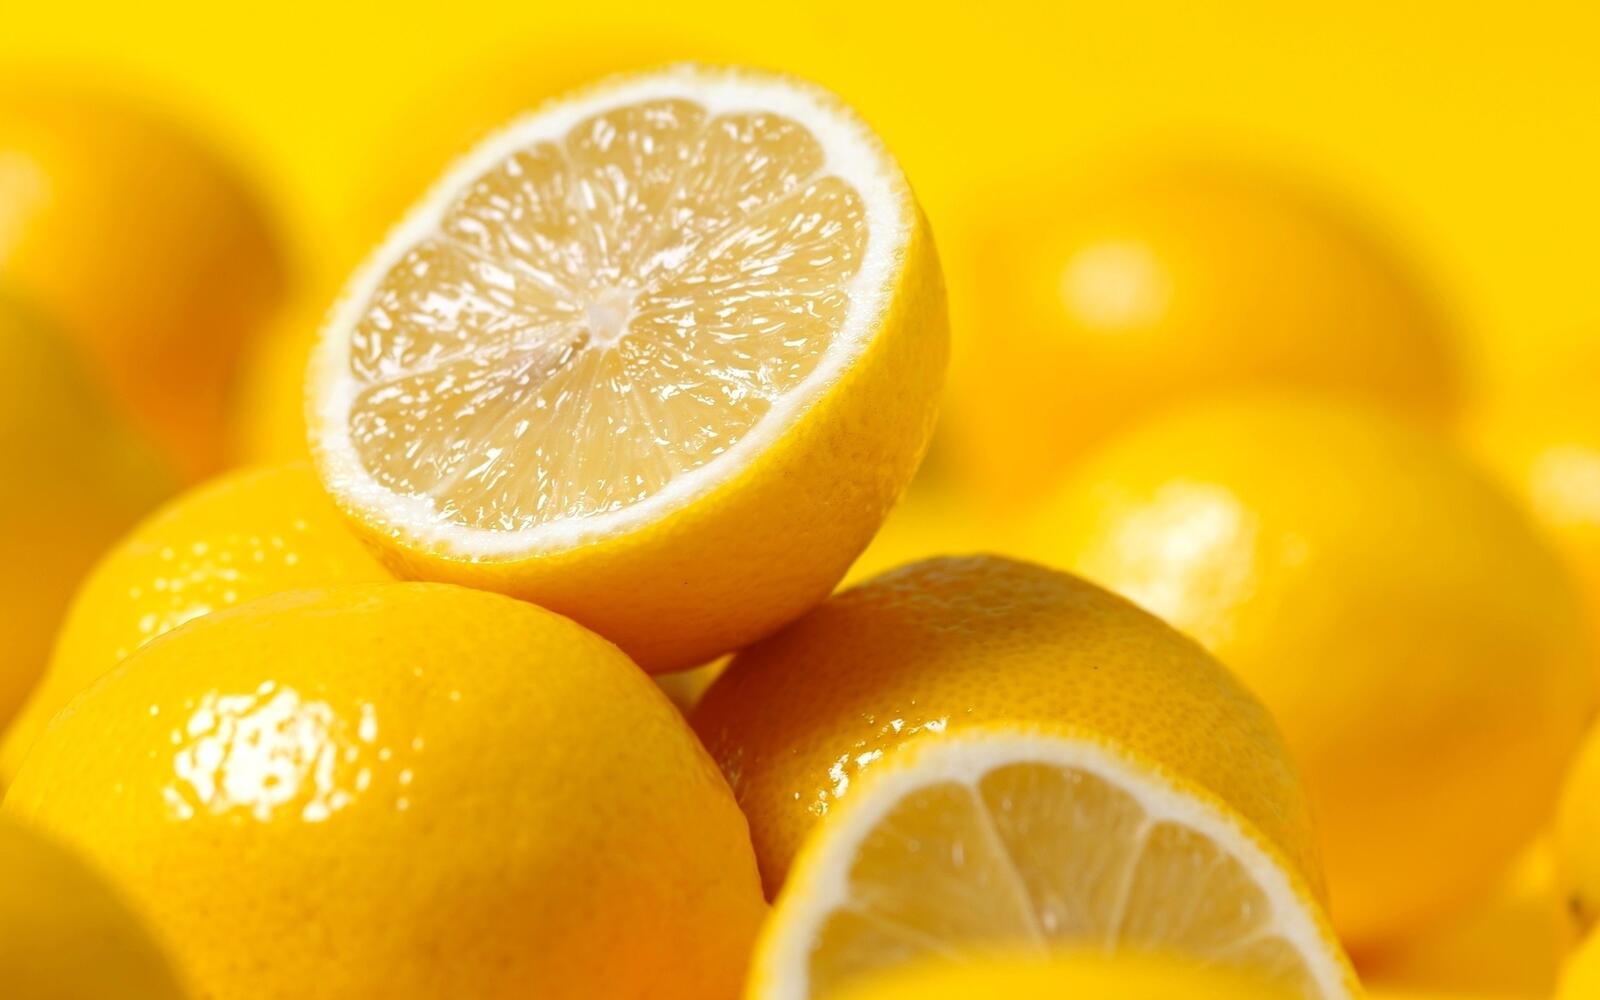 Wallpapers food fruits yellow on the desktop